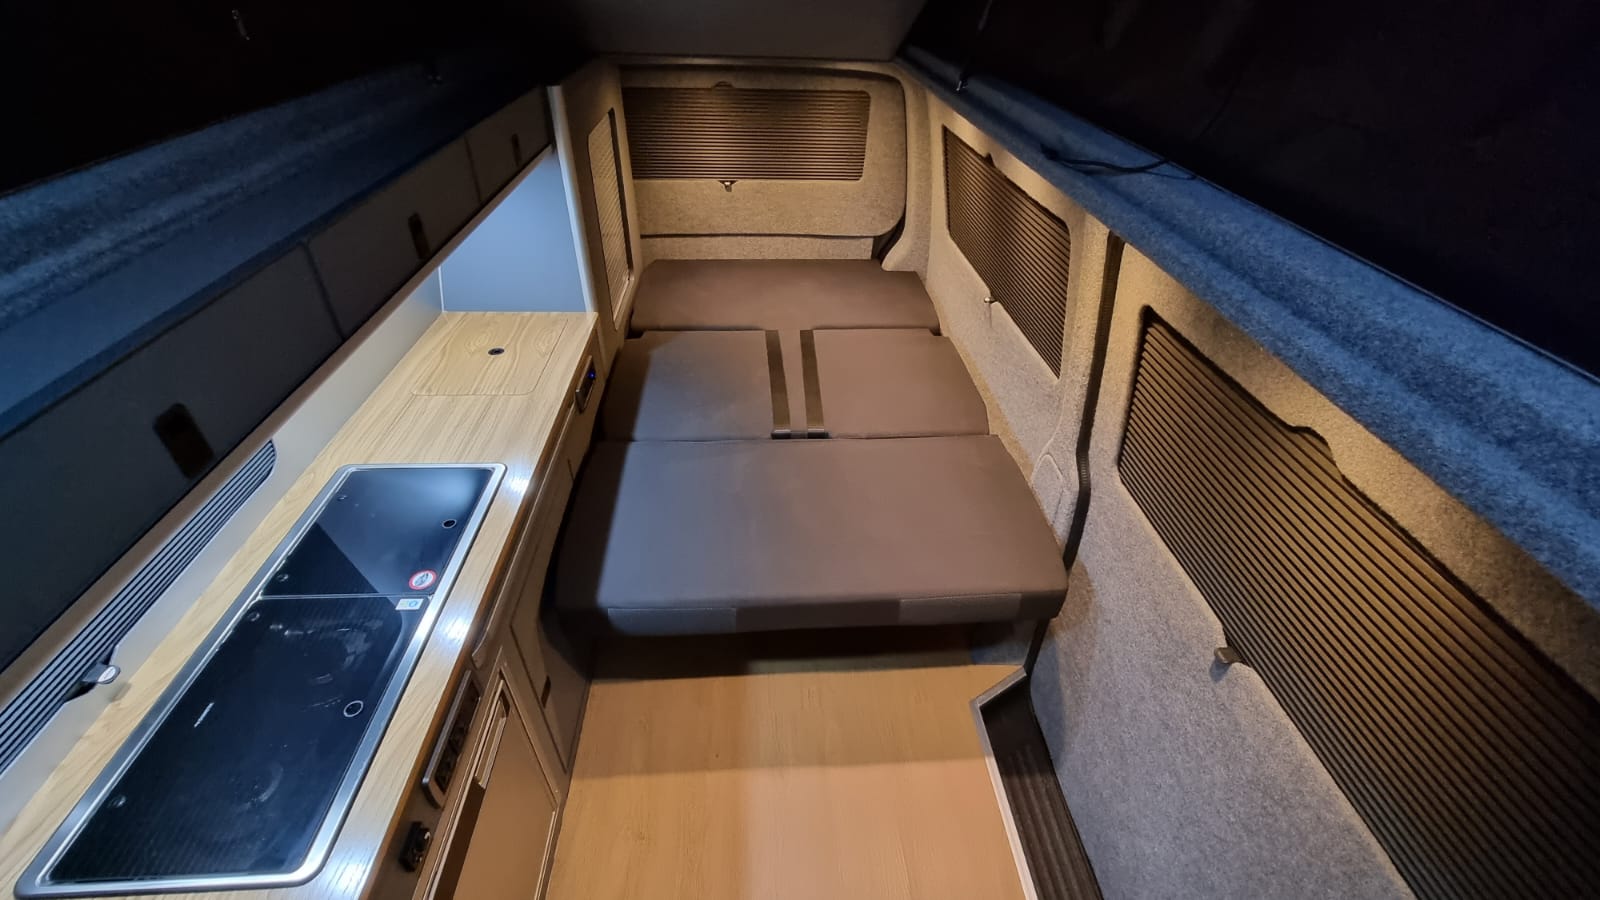 Lay flat rock and roll bed for vanlife